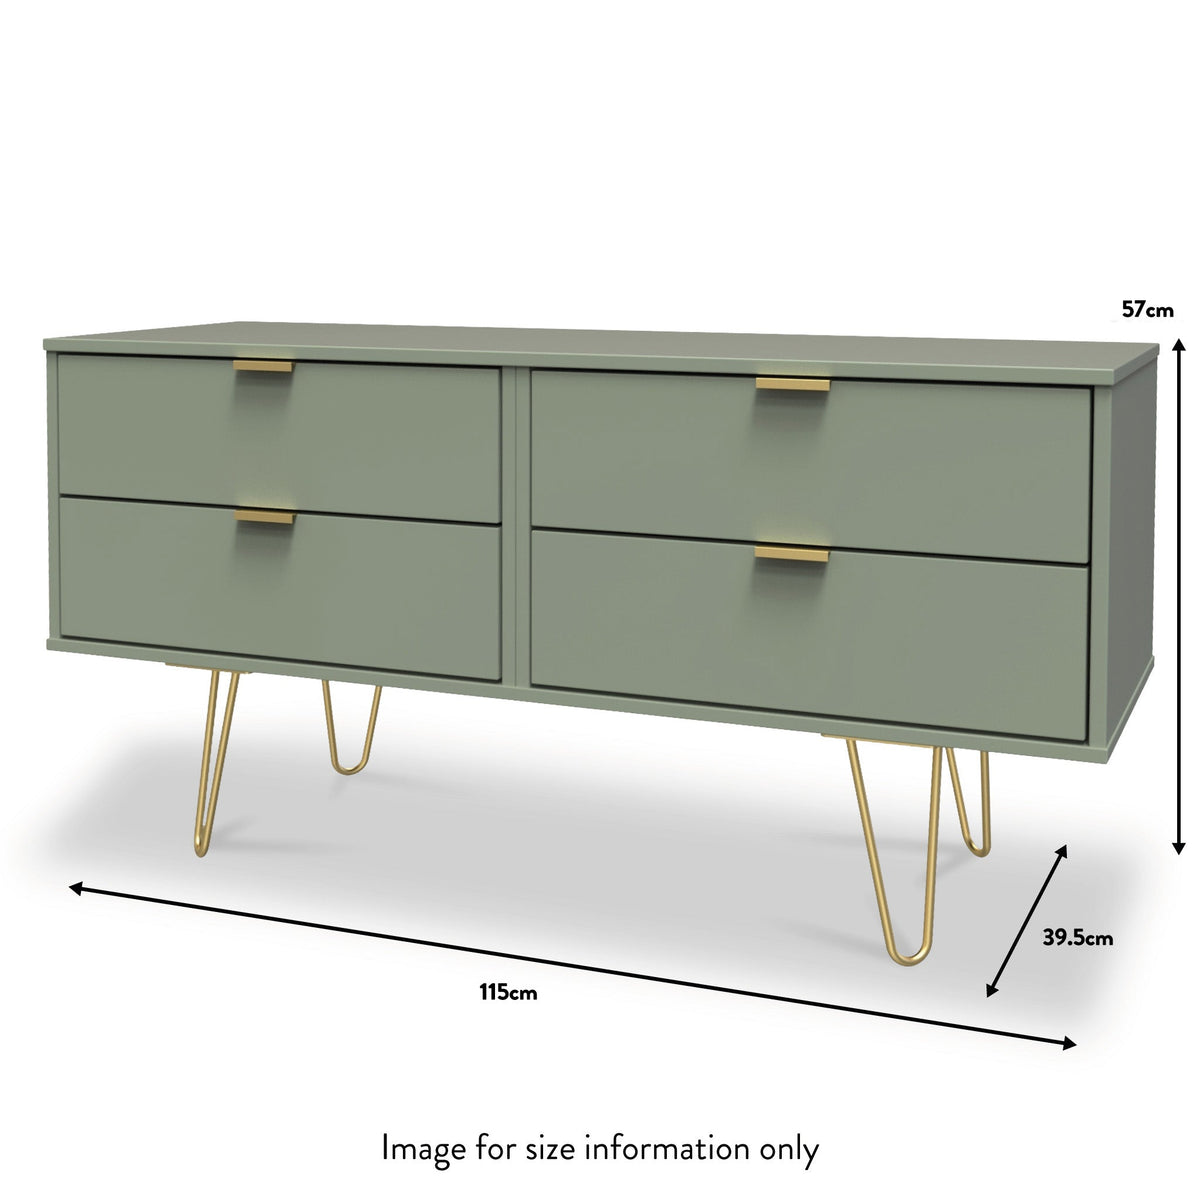 Moreno Olive Green Low 4 Drawer Chest with gold hairpin legs dimensions guide